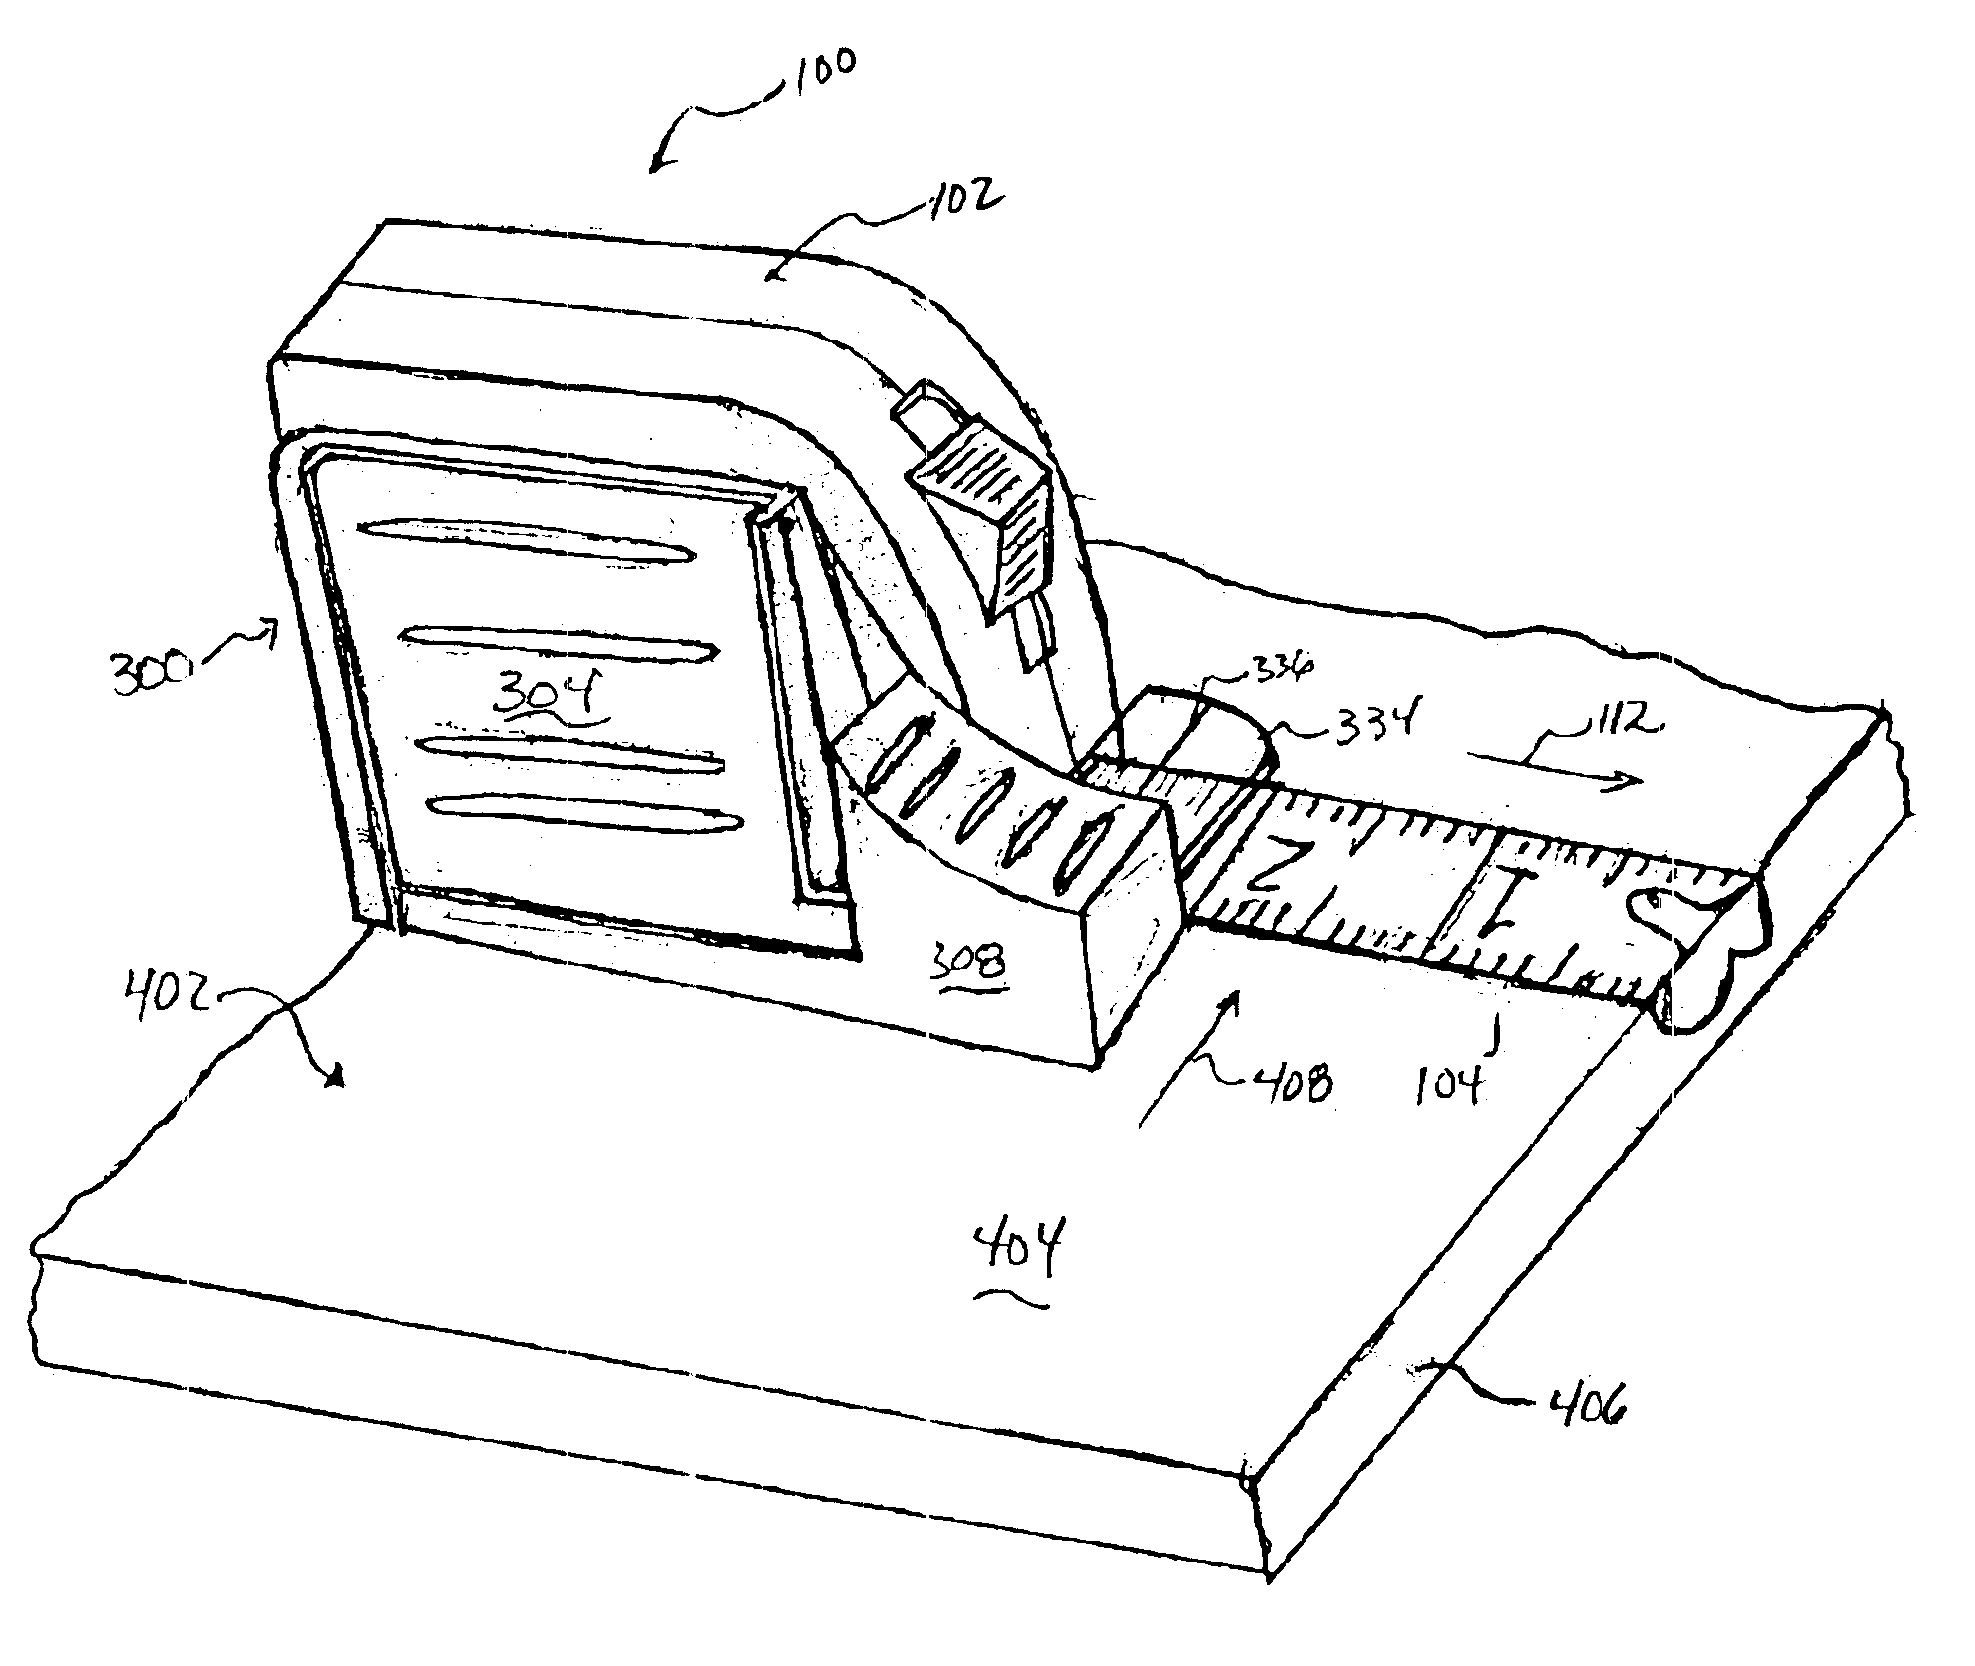 Marking mechanism for a tape measure and tape measure incorporating same